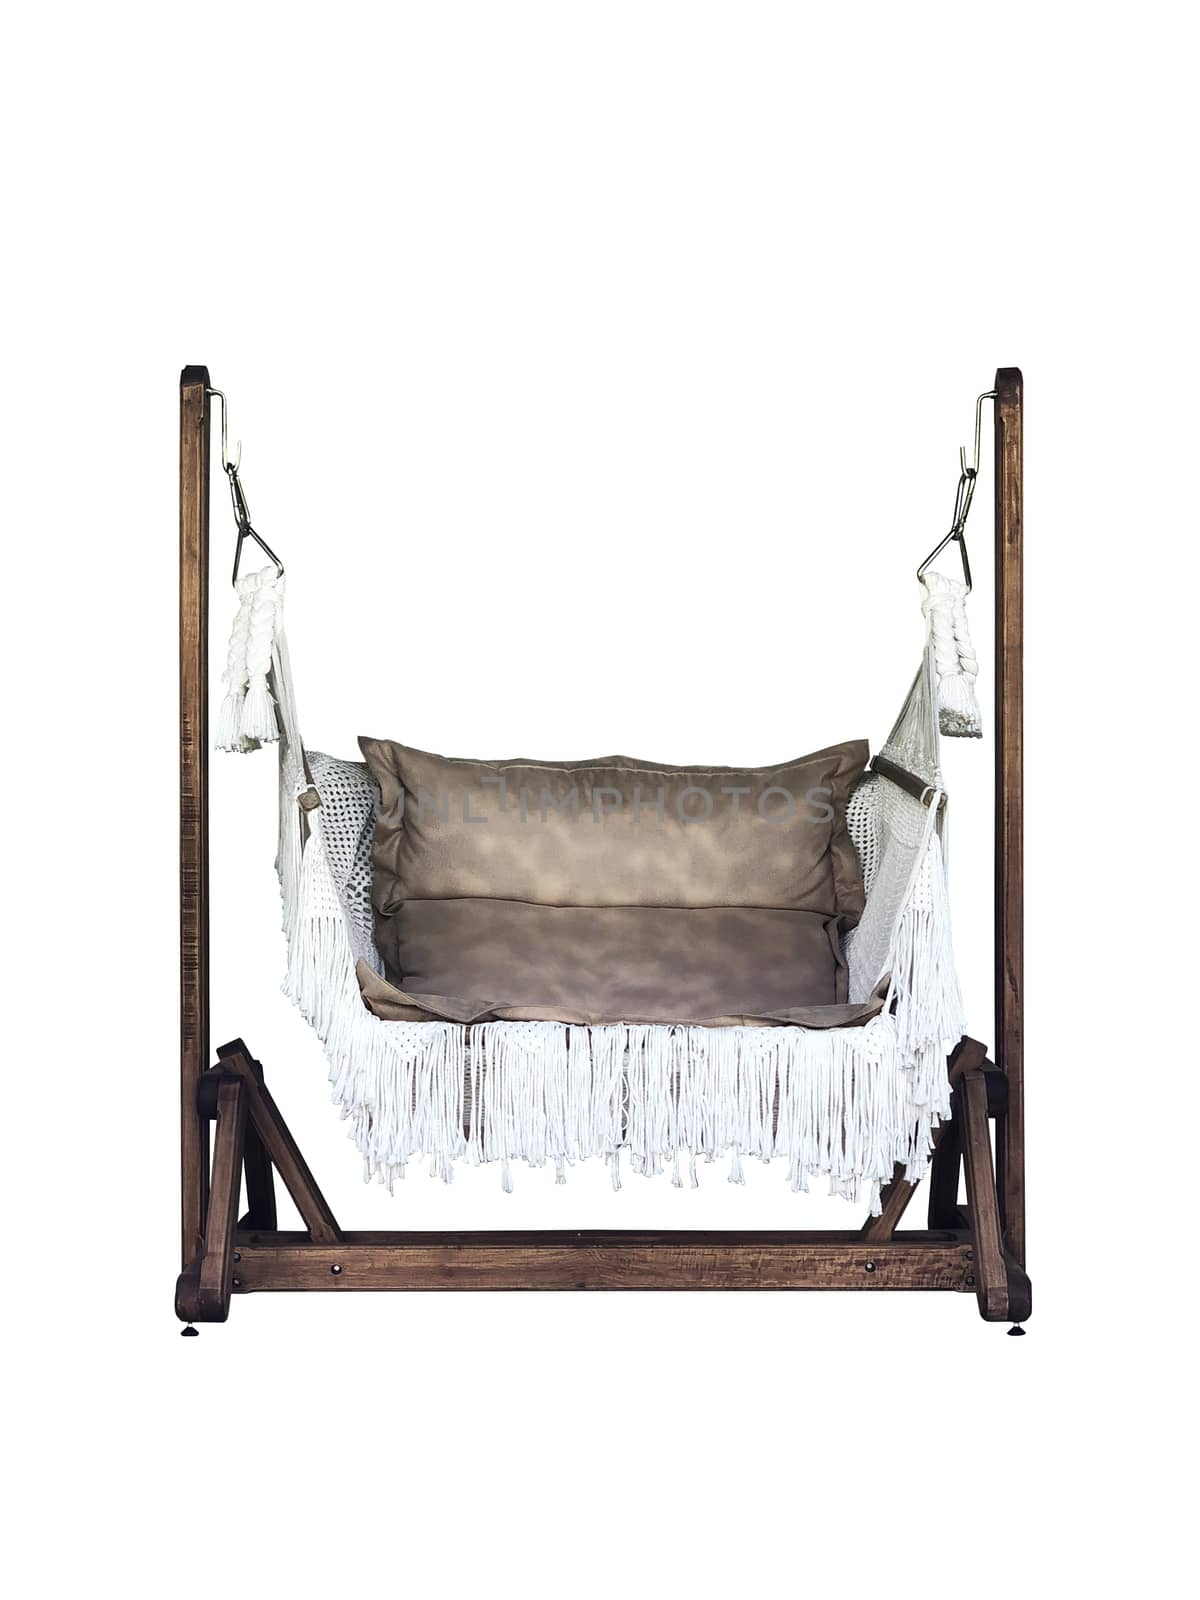 Classic outdoor chair leather swing isolalated on white blackgro by Surasak